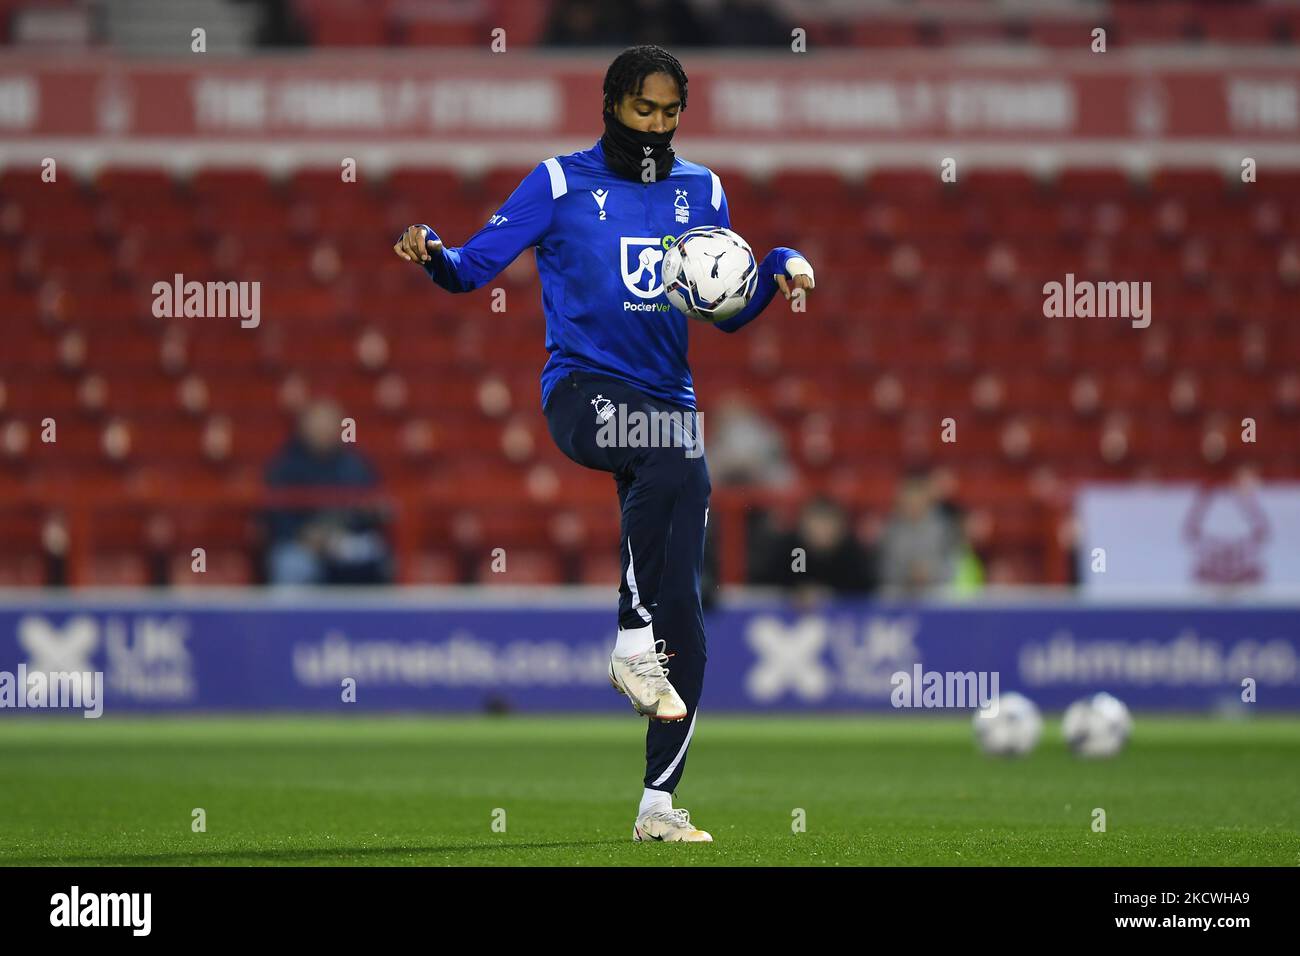 Djed Spence of Nottingham Forest warms up ahead of kick-off during the Sky Bet Championship match between Nottingham Forest and Luton Town at the City Ground, Nottingham on Tuesday 23rd November 2021. (Photo by Jon Hobley/MI News/NurPhoto) Stock Photo